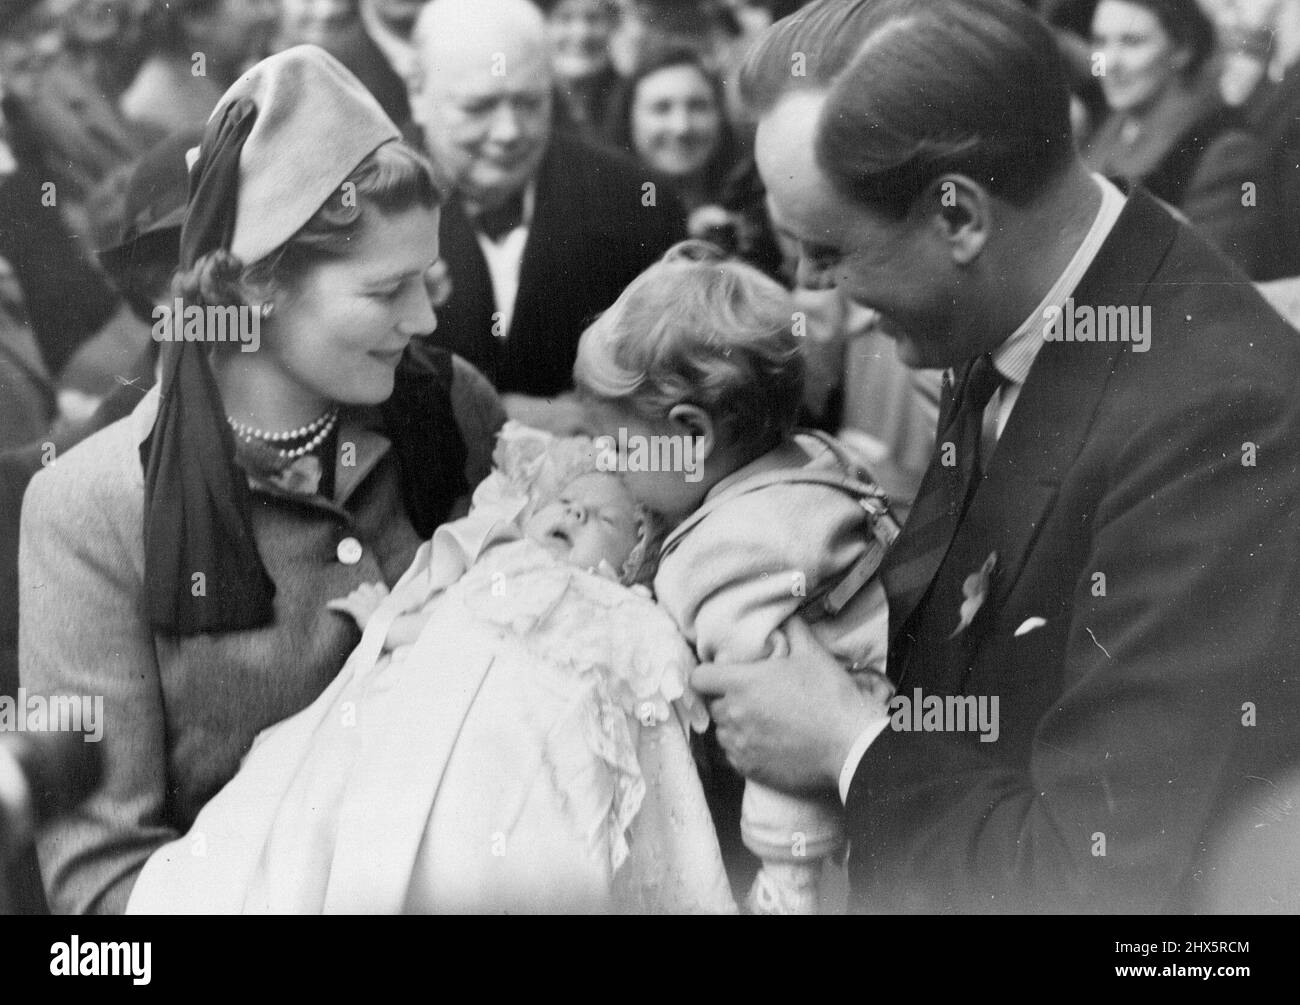 Mr. Churchill's Grandchild Christened -- Mr. Winston Churchill (in background) looks on as little Nicholas Soames kisses his baby sister Emma Mary, who is held by Mrs. Christopher Soames, formerly Miss Mary Churchill. Captain Soames is soon with his wife. Mr. Winston Churchill paid a visit to this Sussex village to attend the christening ceremony of his sixth grandchild, Emma Mary, infant daughter of Mr. and Mrs. Churchill's daughter, Mary, wife of Captain Christopher Soames. Captain Soames is prospective Parliamentary candidate of Bedford. November 6, 1949. Stock Photo